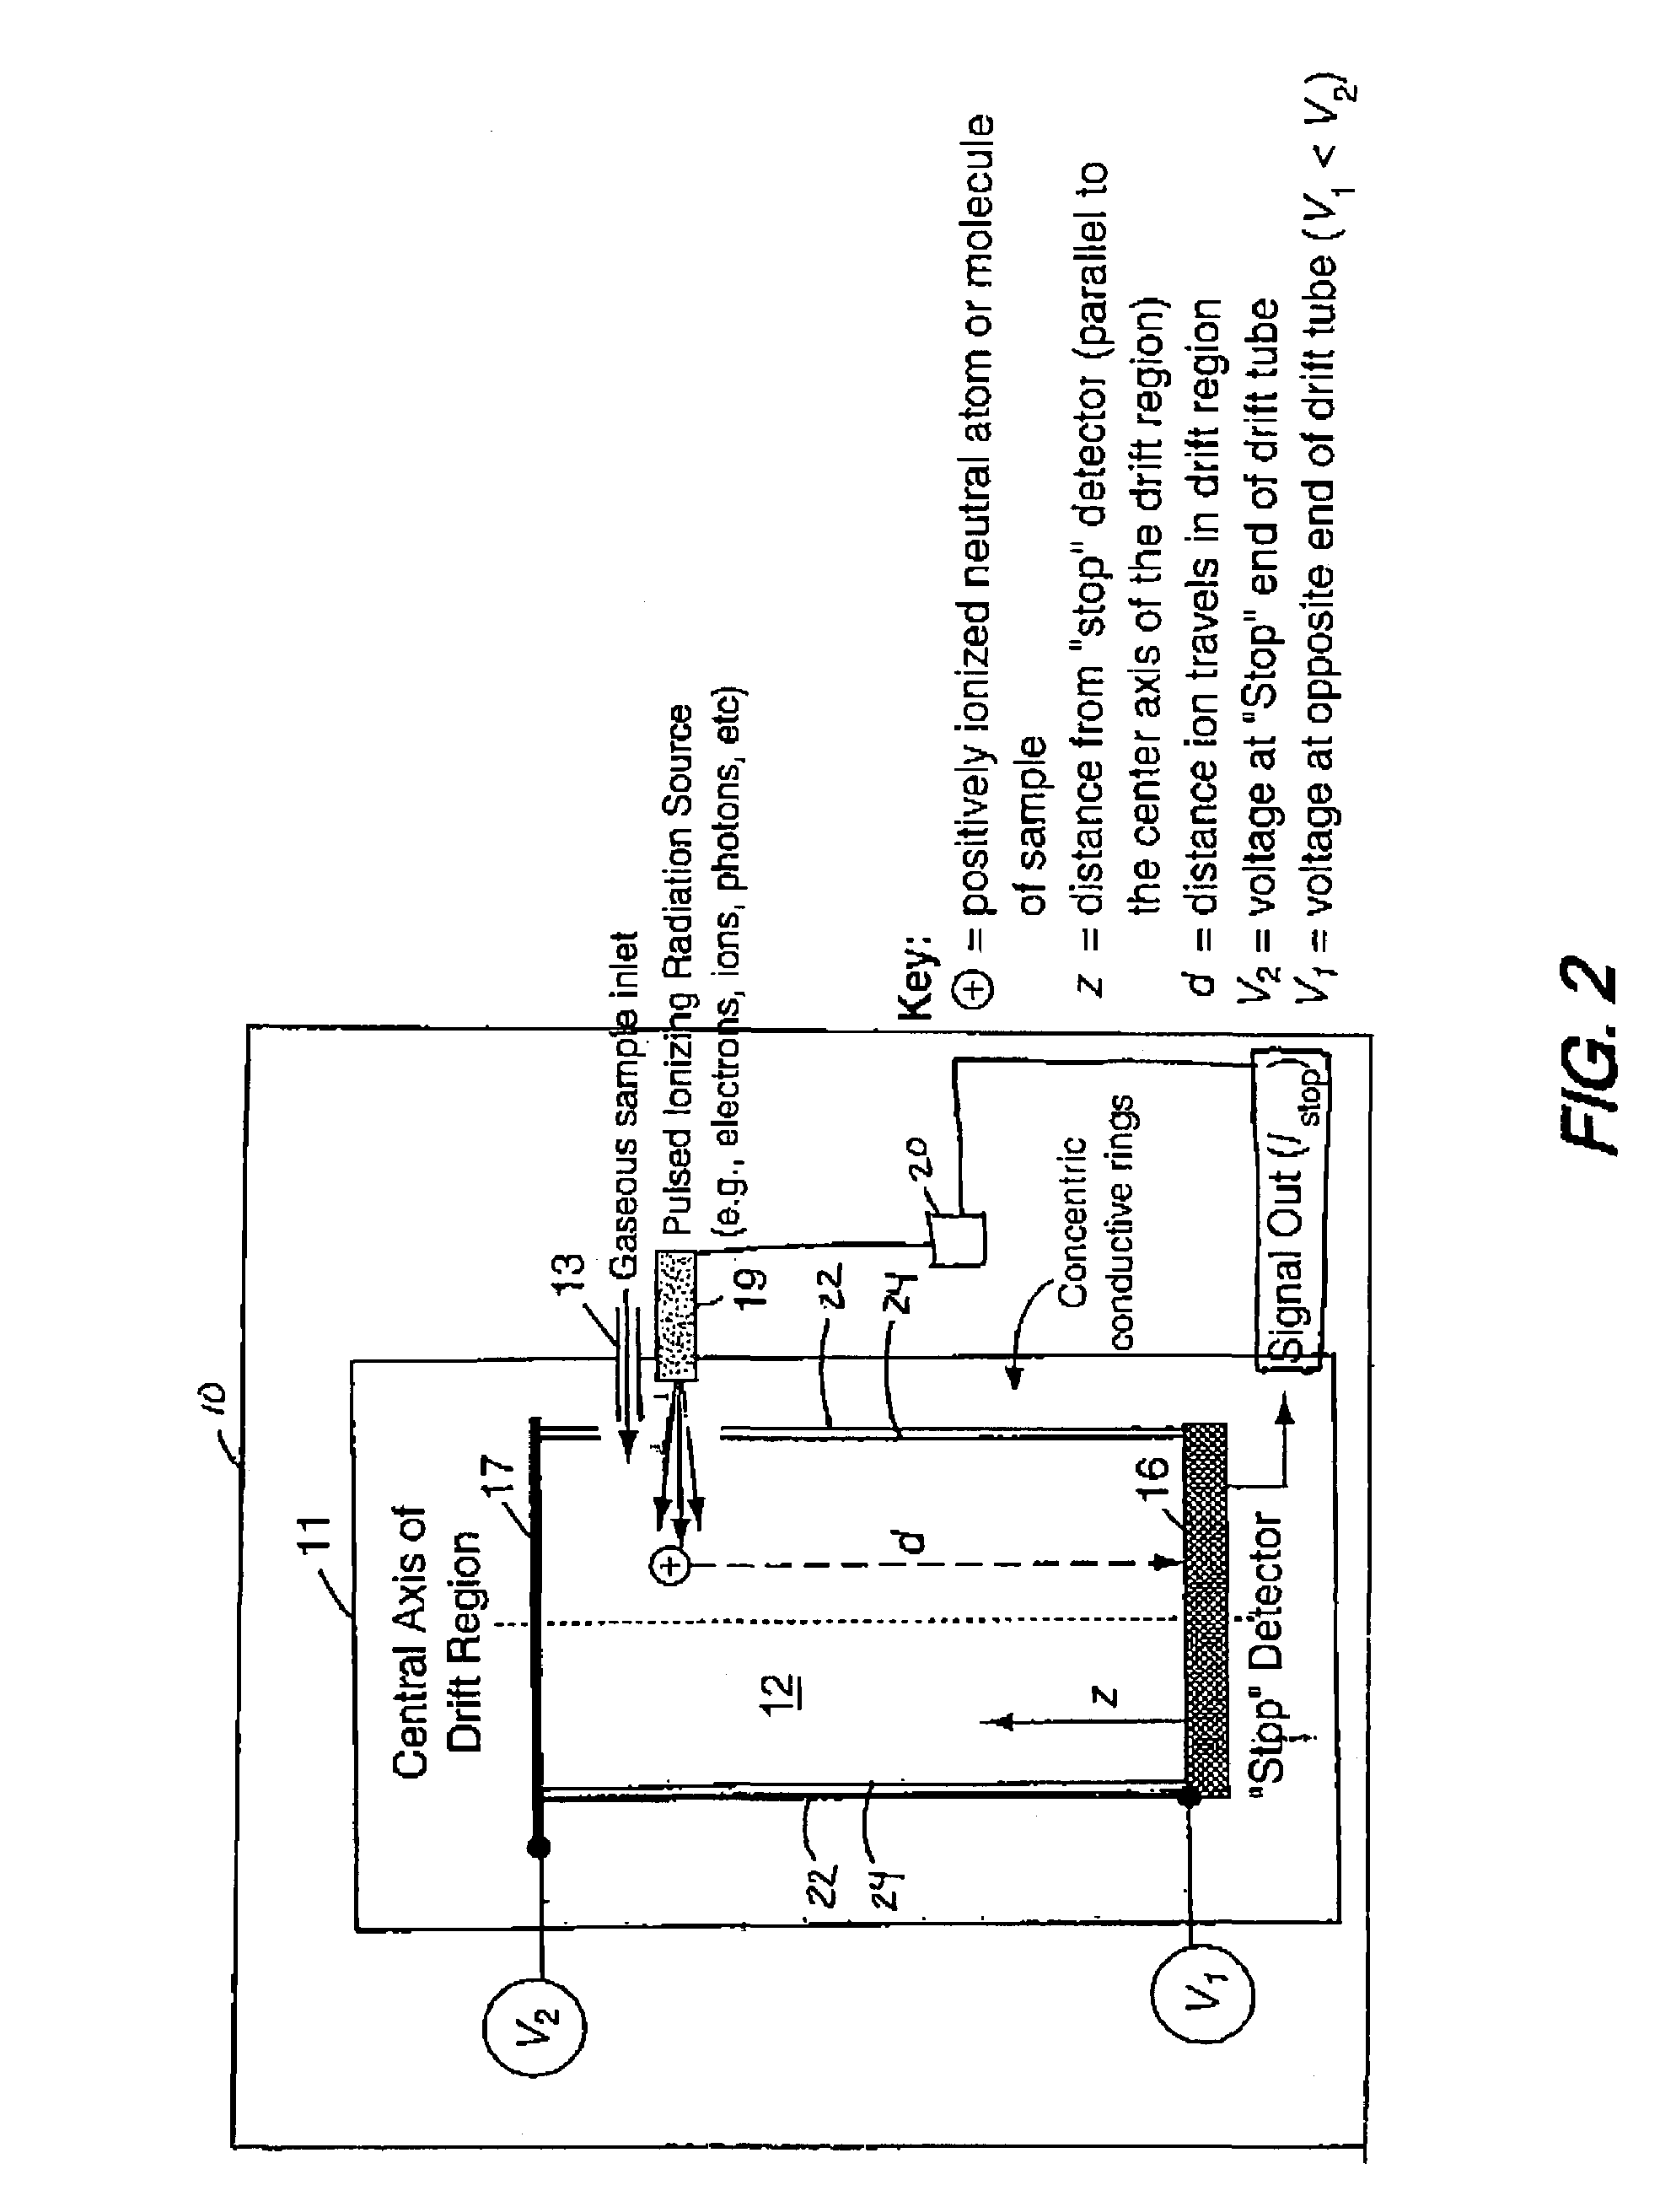 Linear electric field time-of-flight ion mass spectrometer